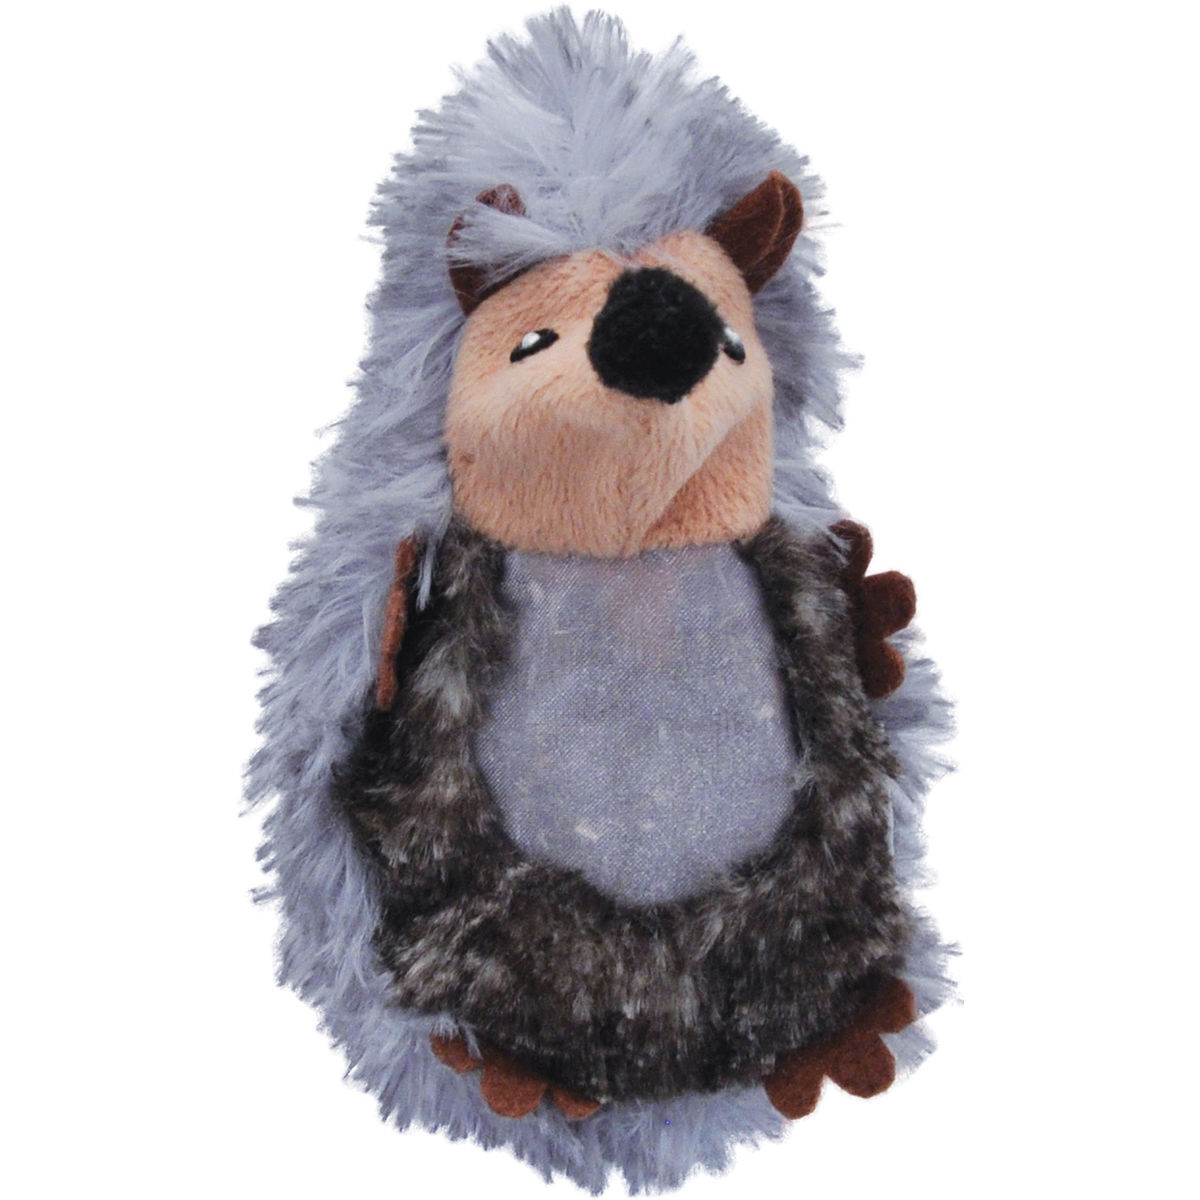 81024 Turbo Catnip Belly Critters Cat Toy, Hedgehog - 6.5 In.